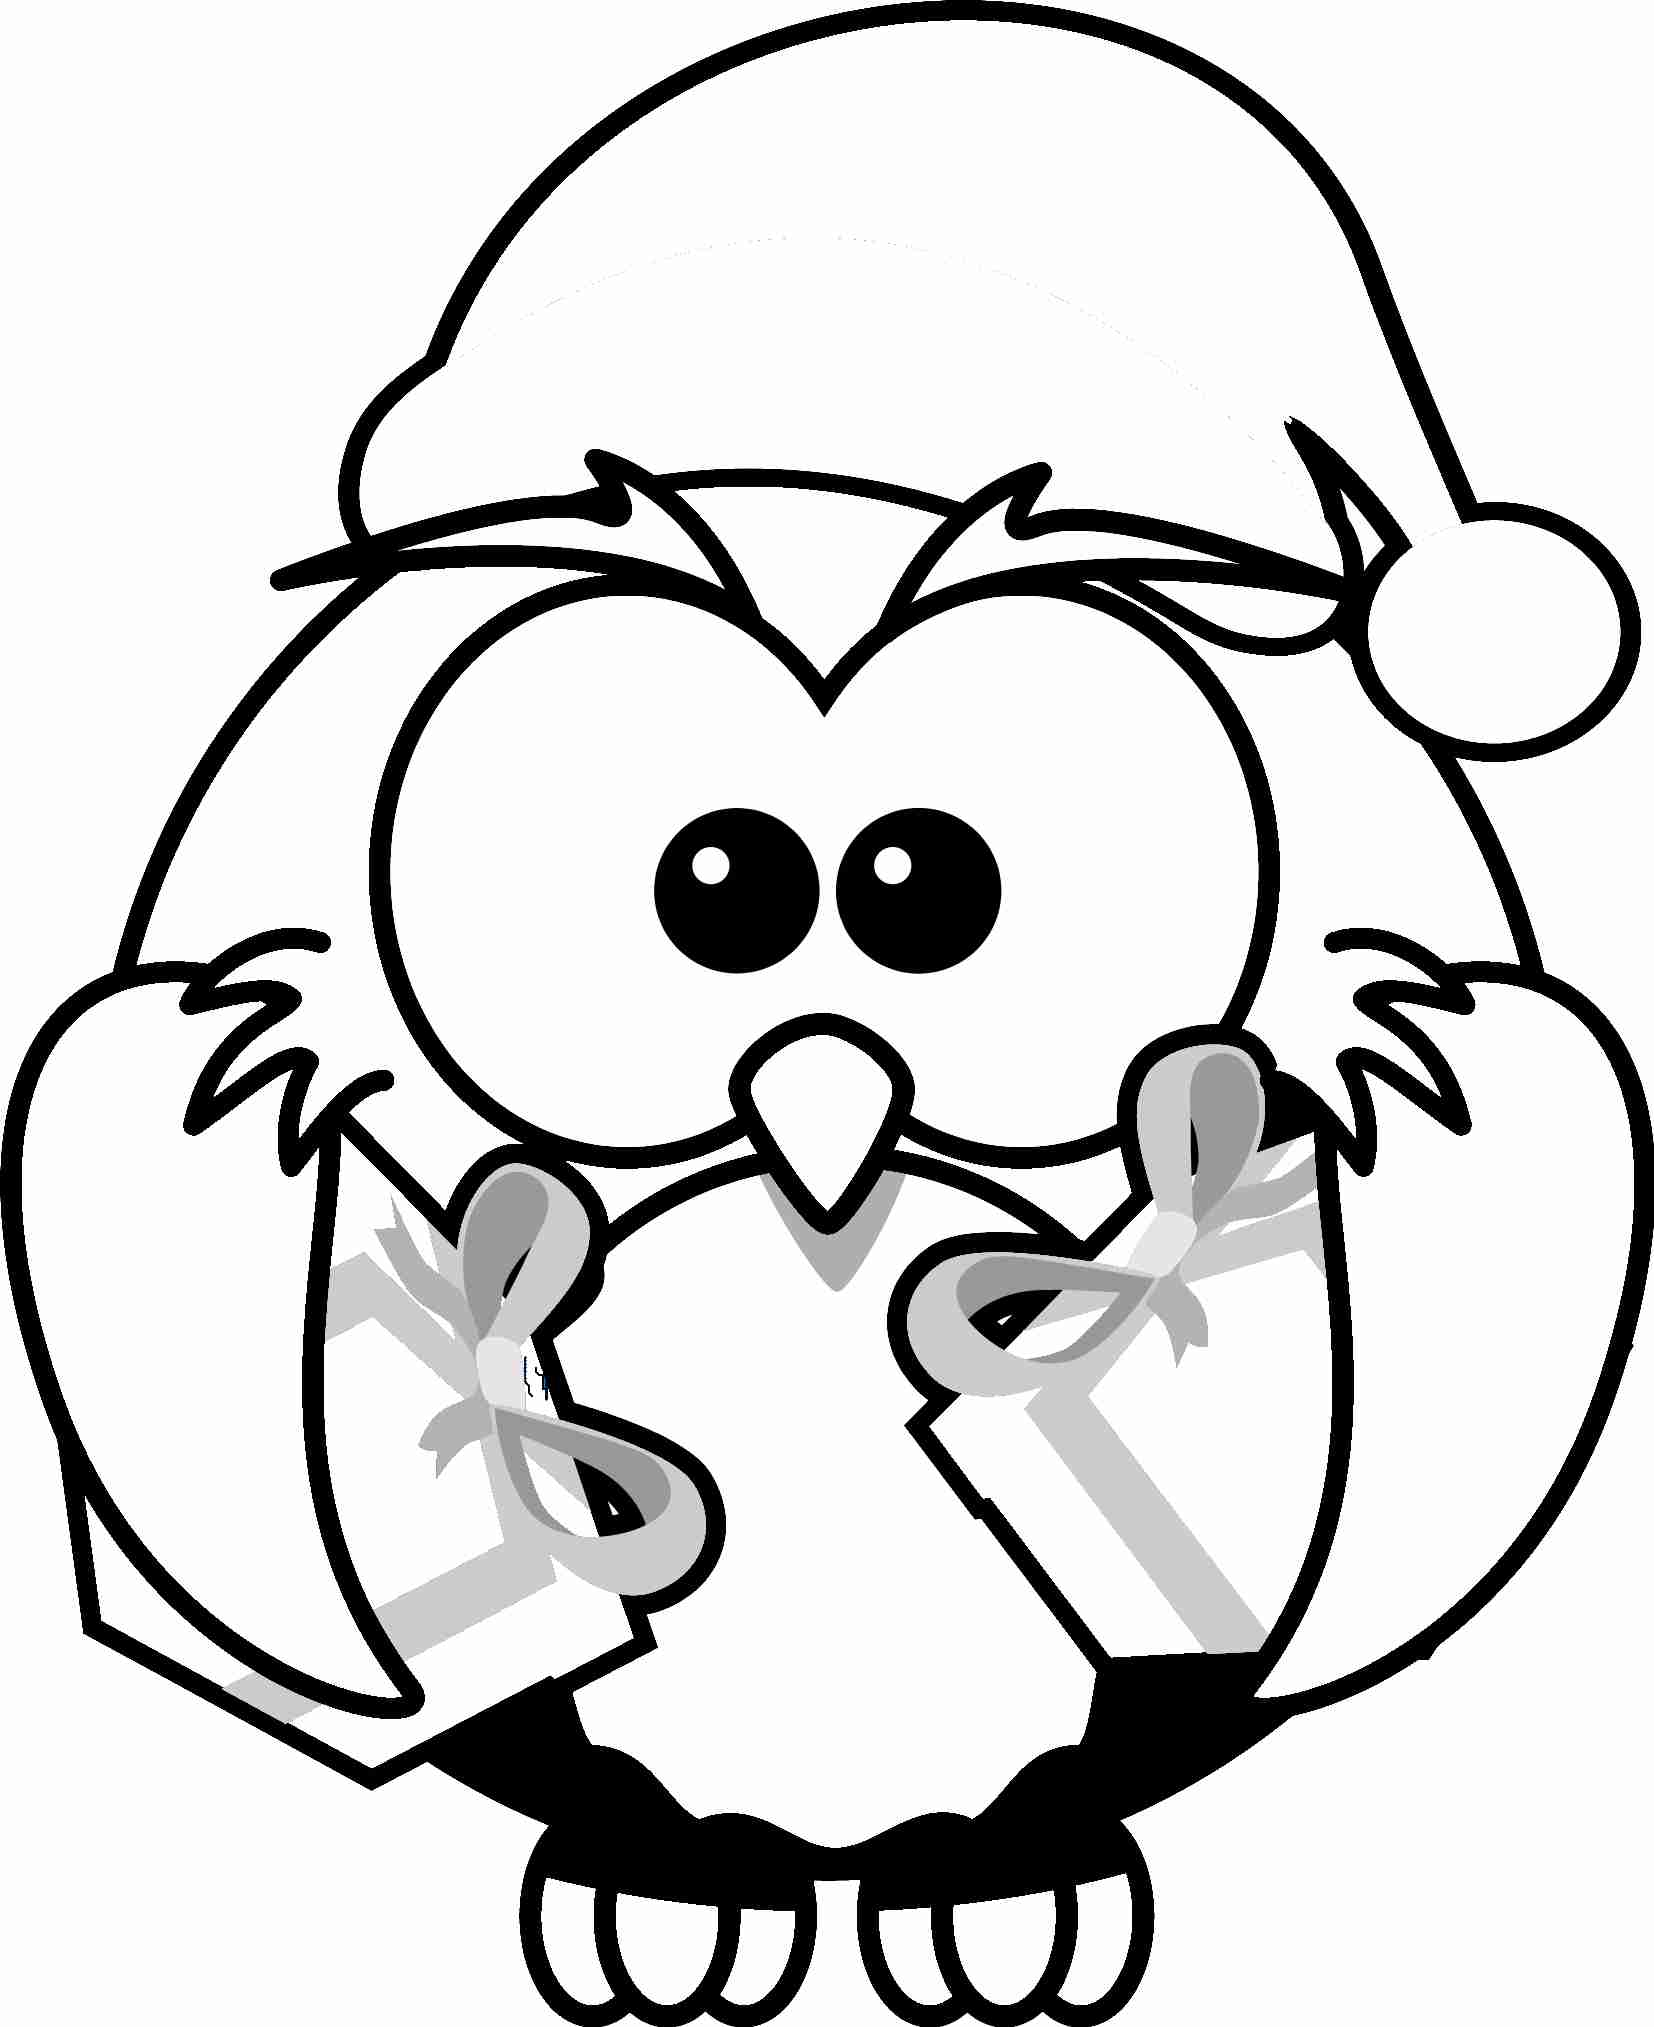 cat coloring page Christmas Penguin